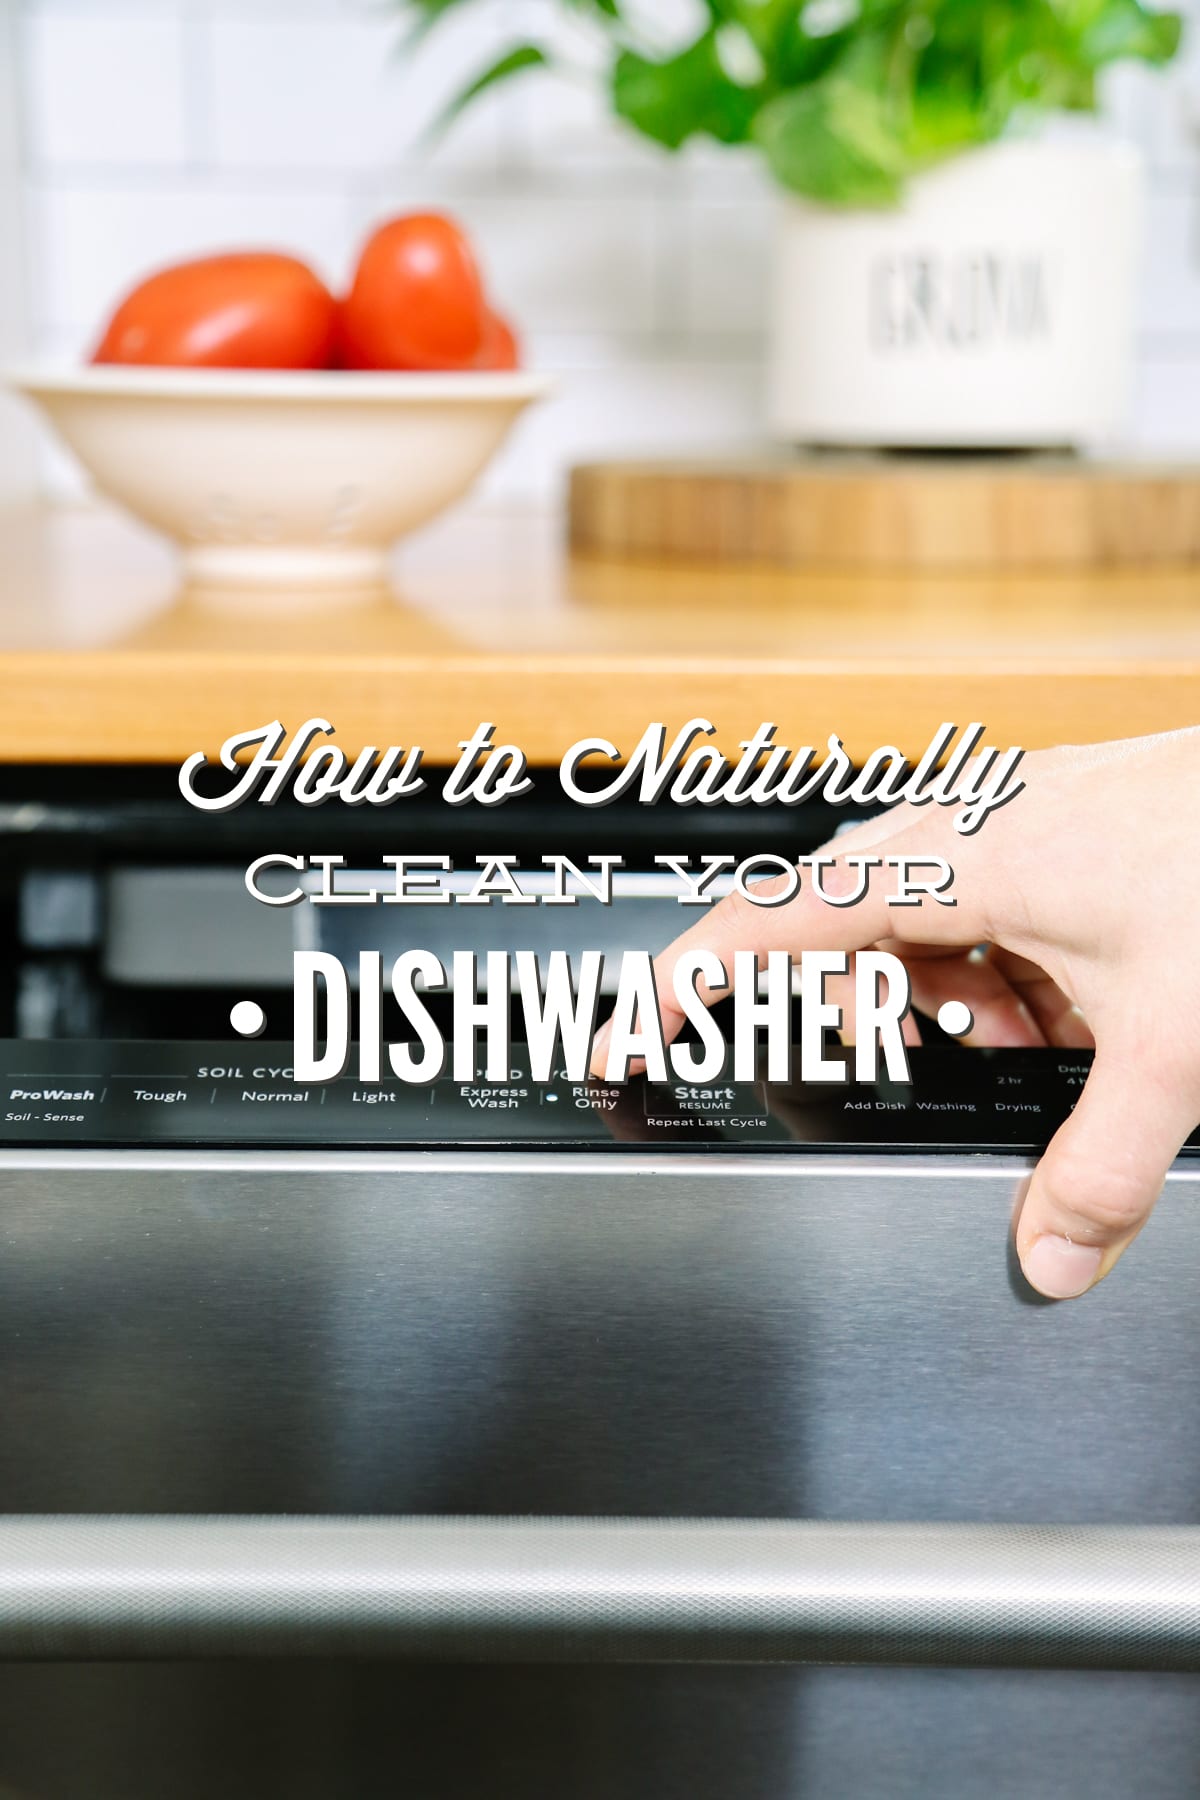 How to Naturally Clean Your Dishwasher